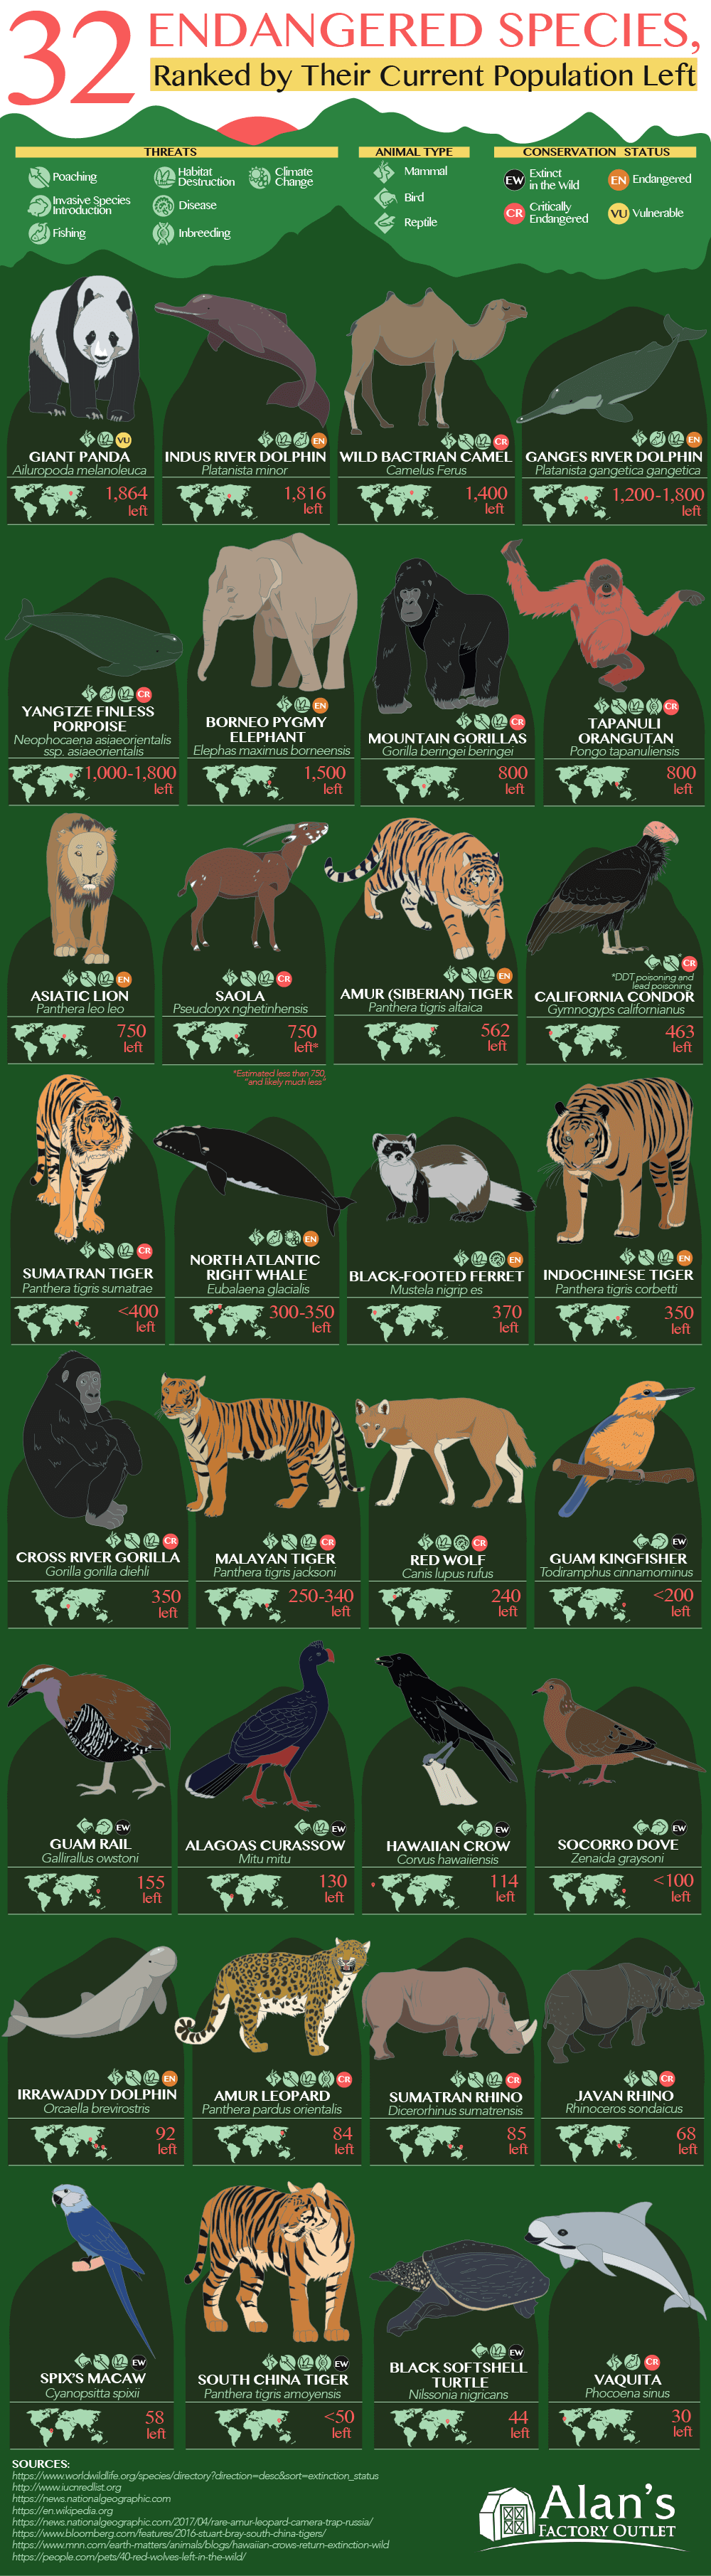 32 Endangered Species, Ranked by Their Current Population Left [Infographic]